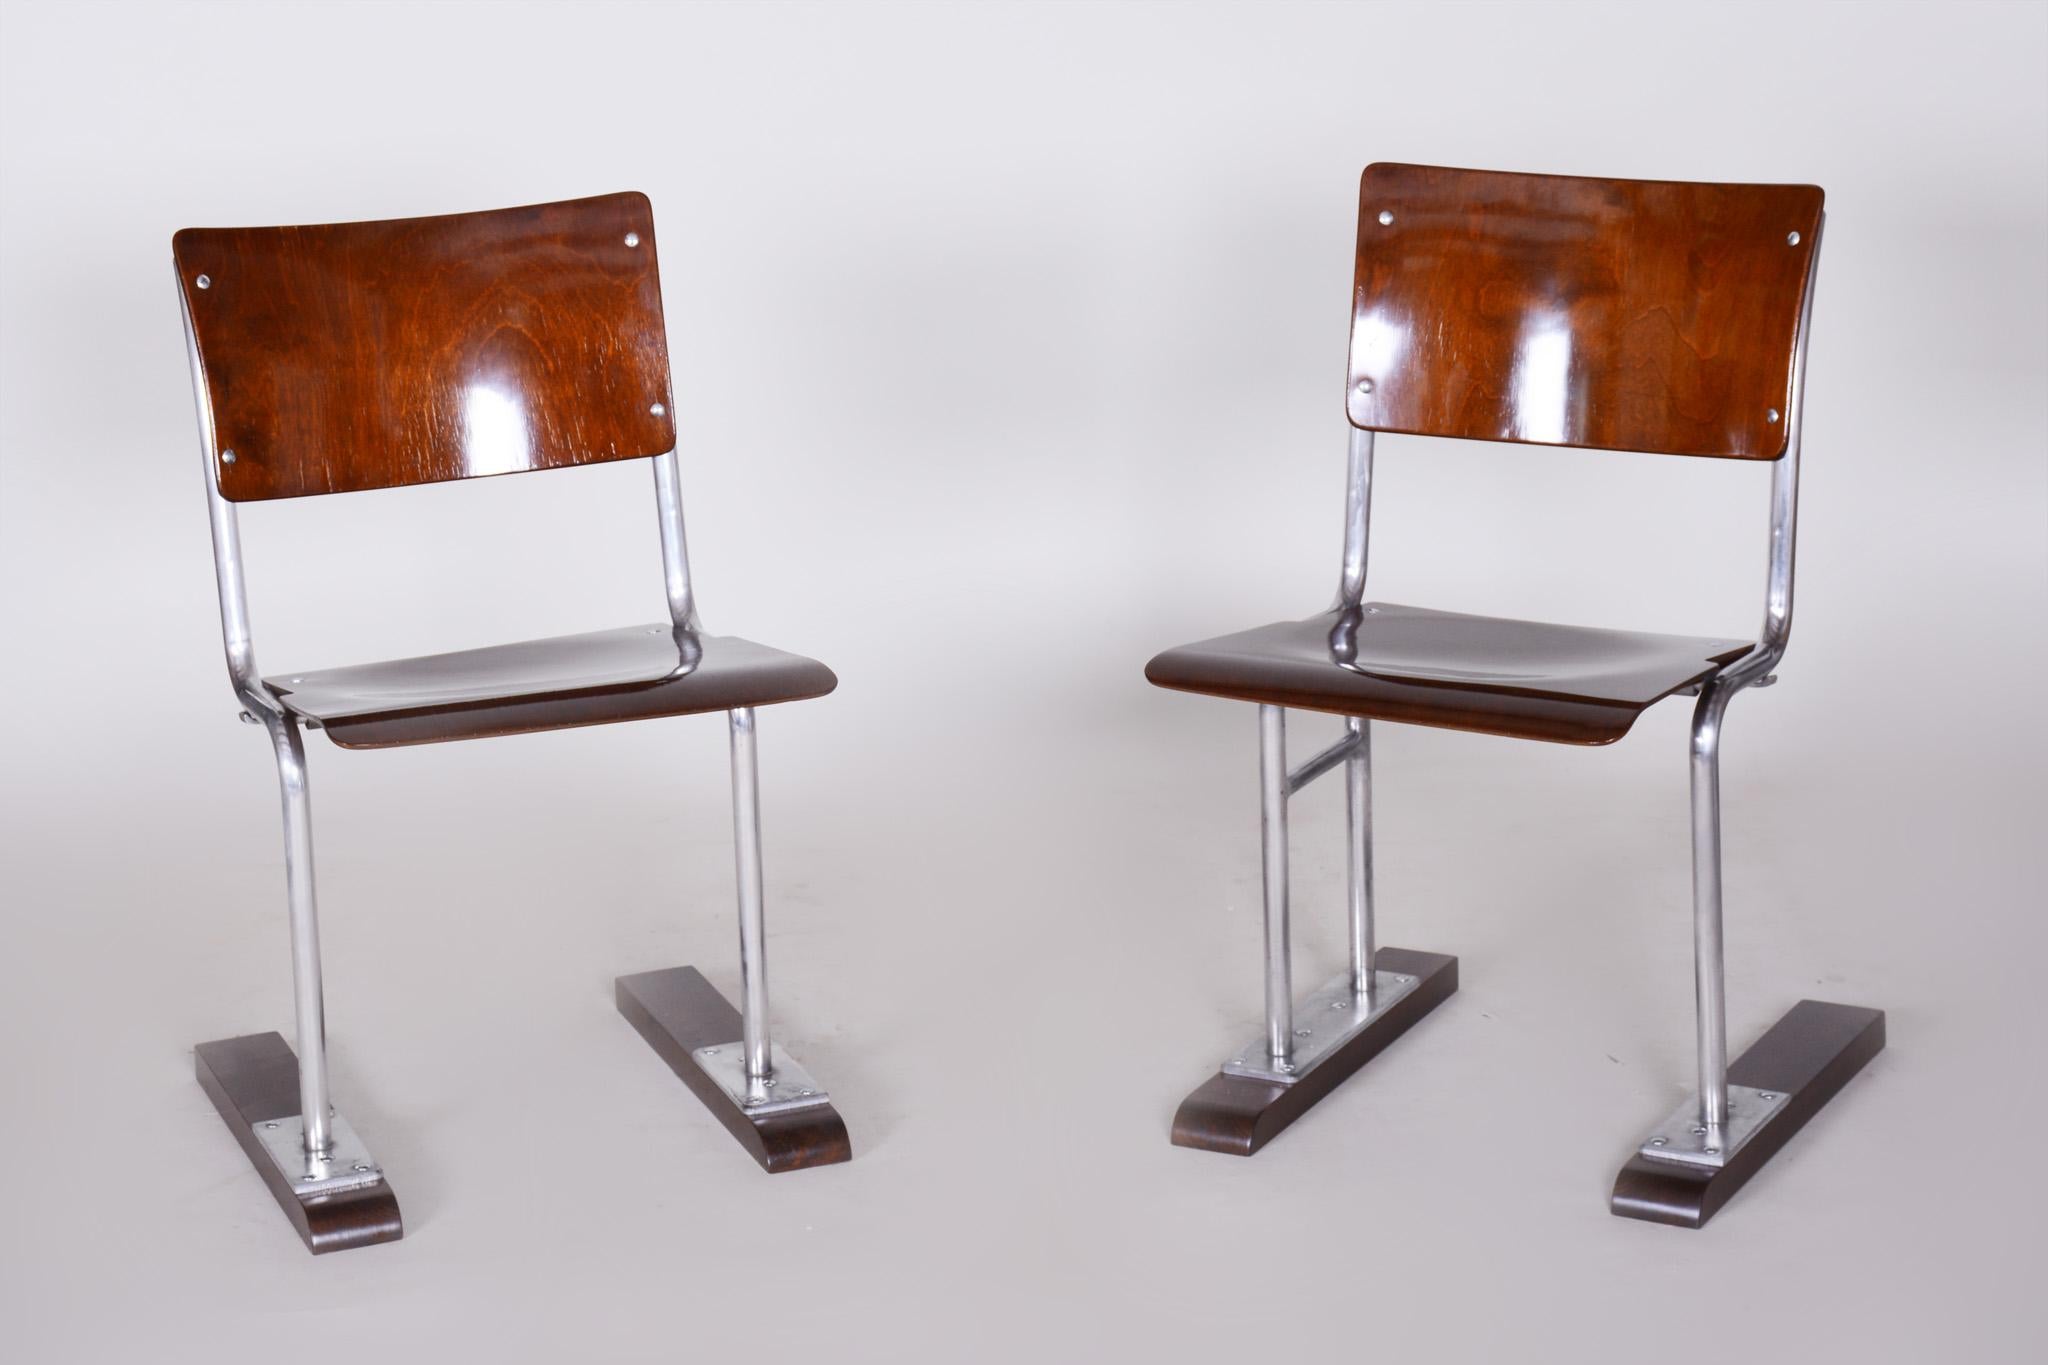 Design by Thonet

Folding chairs - 2 pcs
Style: Bauhaus.
Period: 1920-1929.
Material: Beech and chrome-plated steel
Source: Germany.